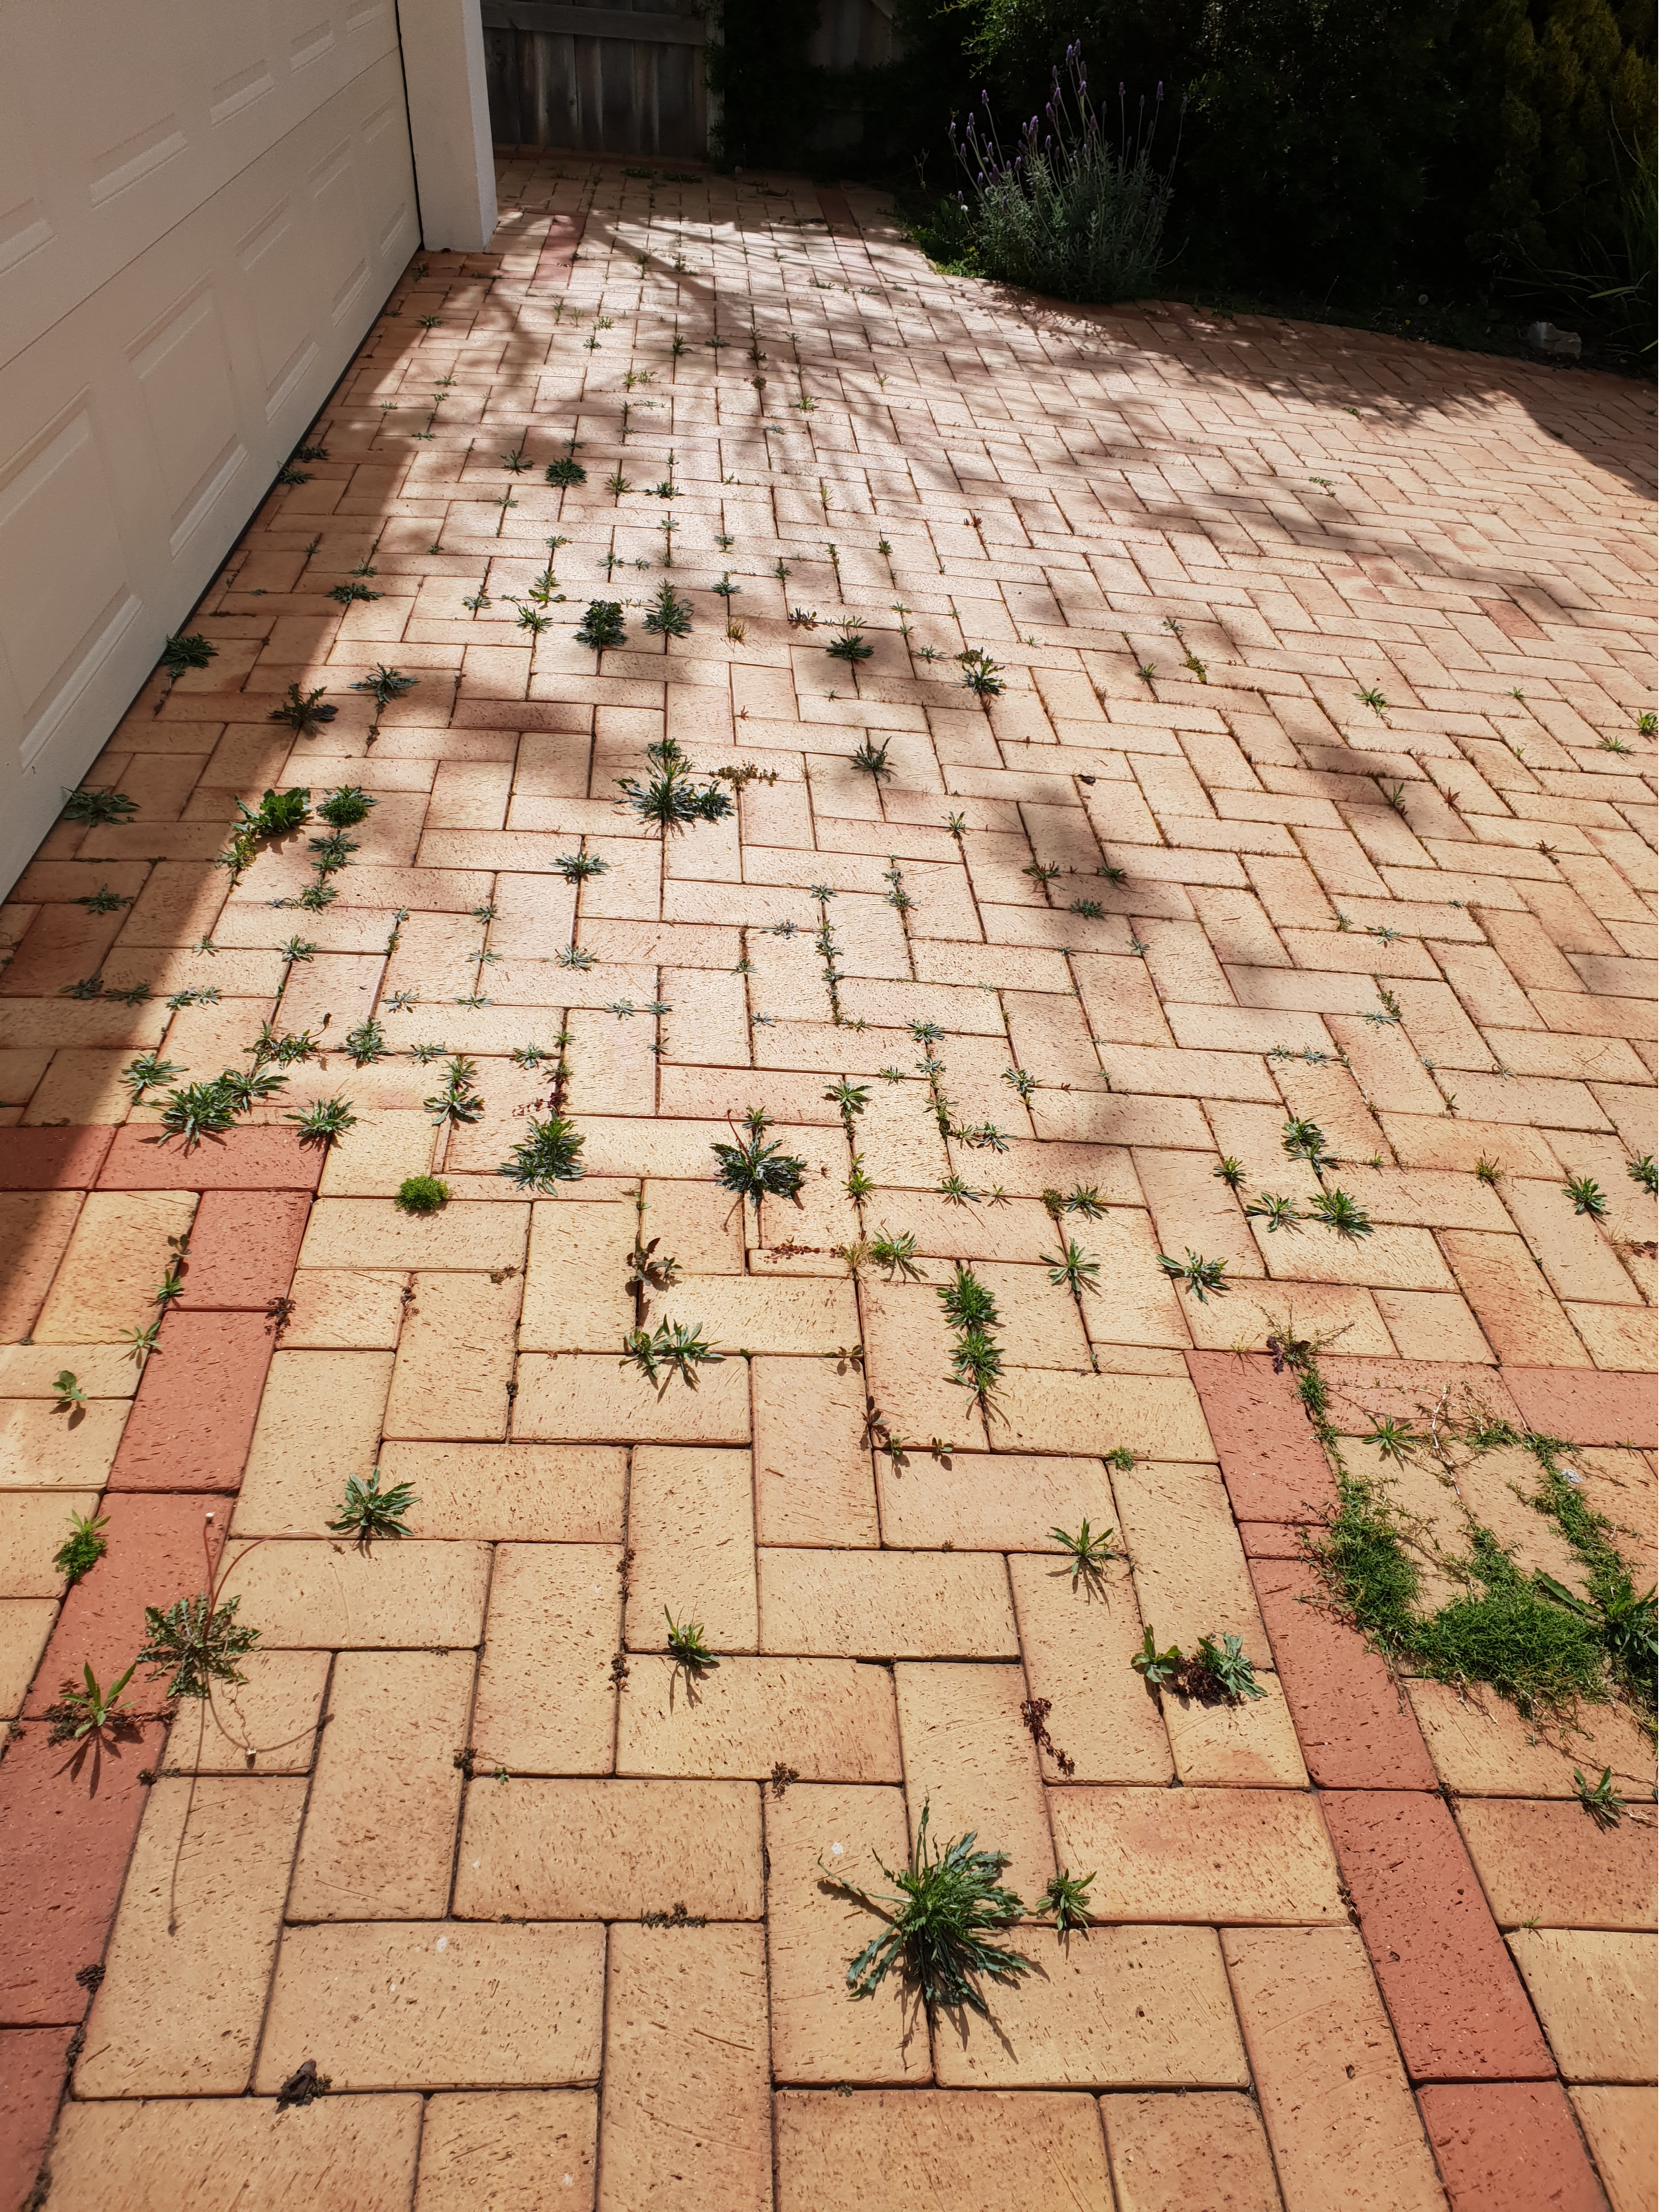 How To Seal Pavers To Prevent Weeds